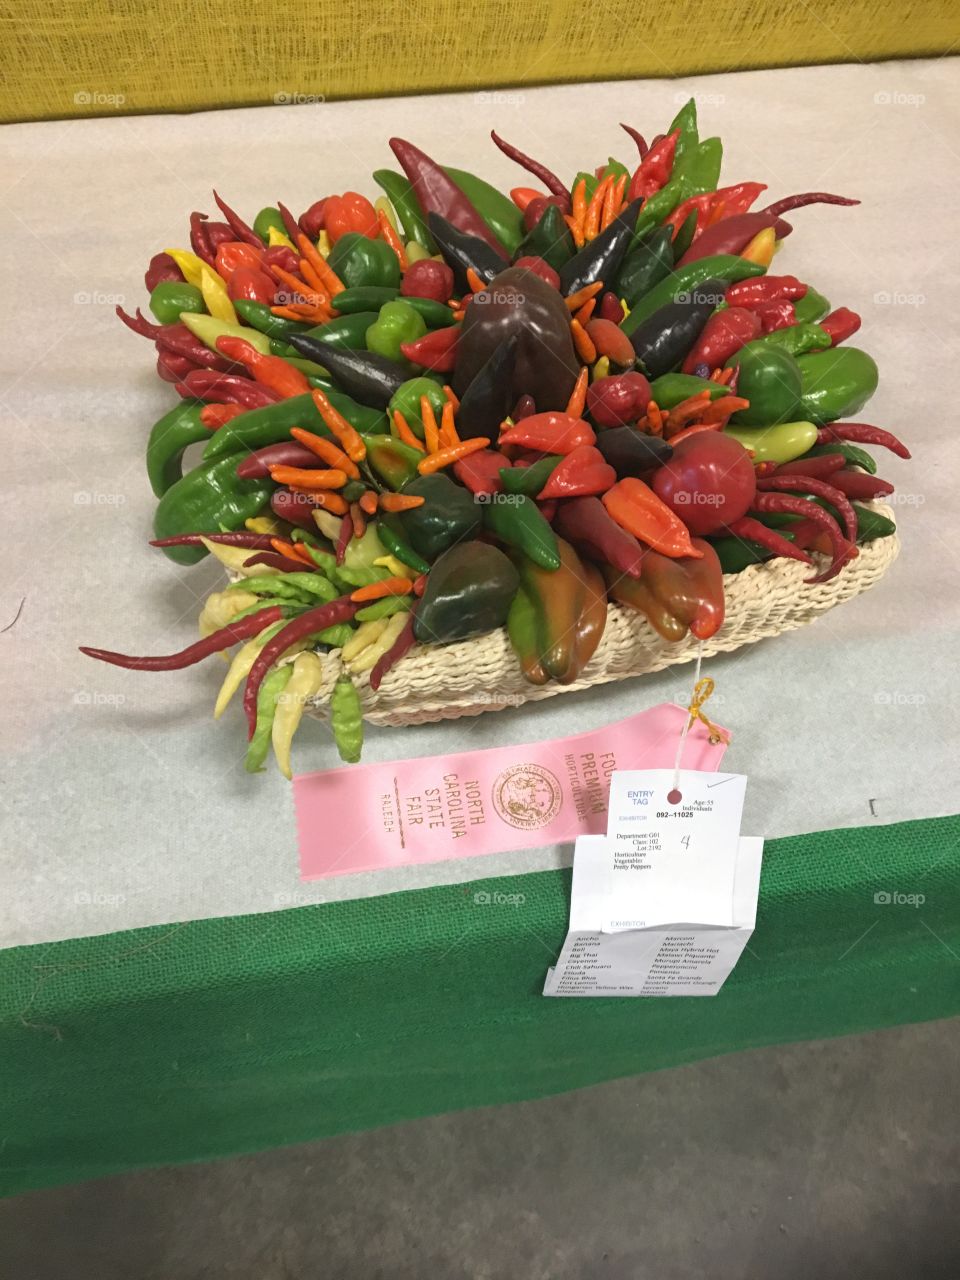 Award winning peppers at the state fair